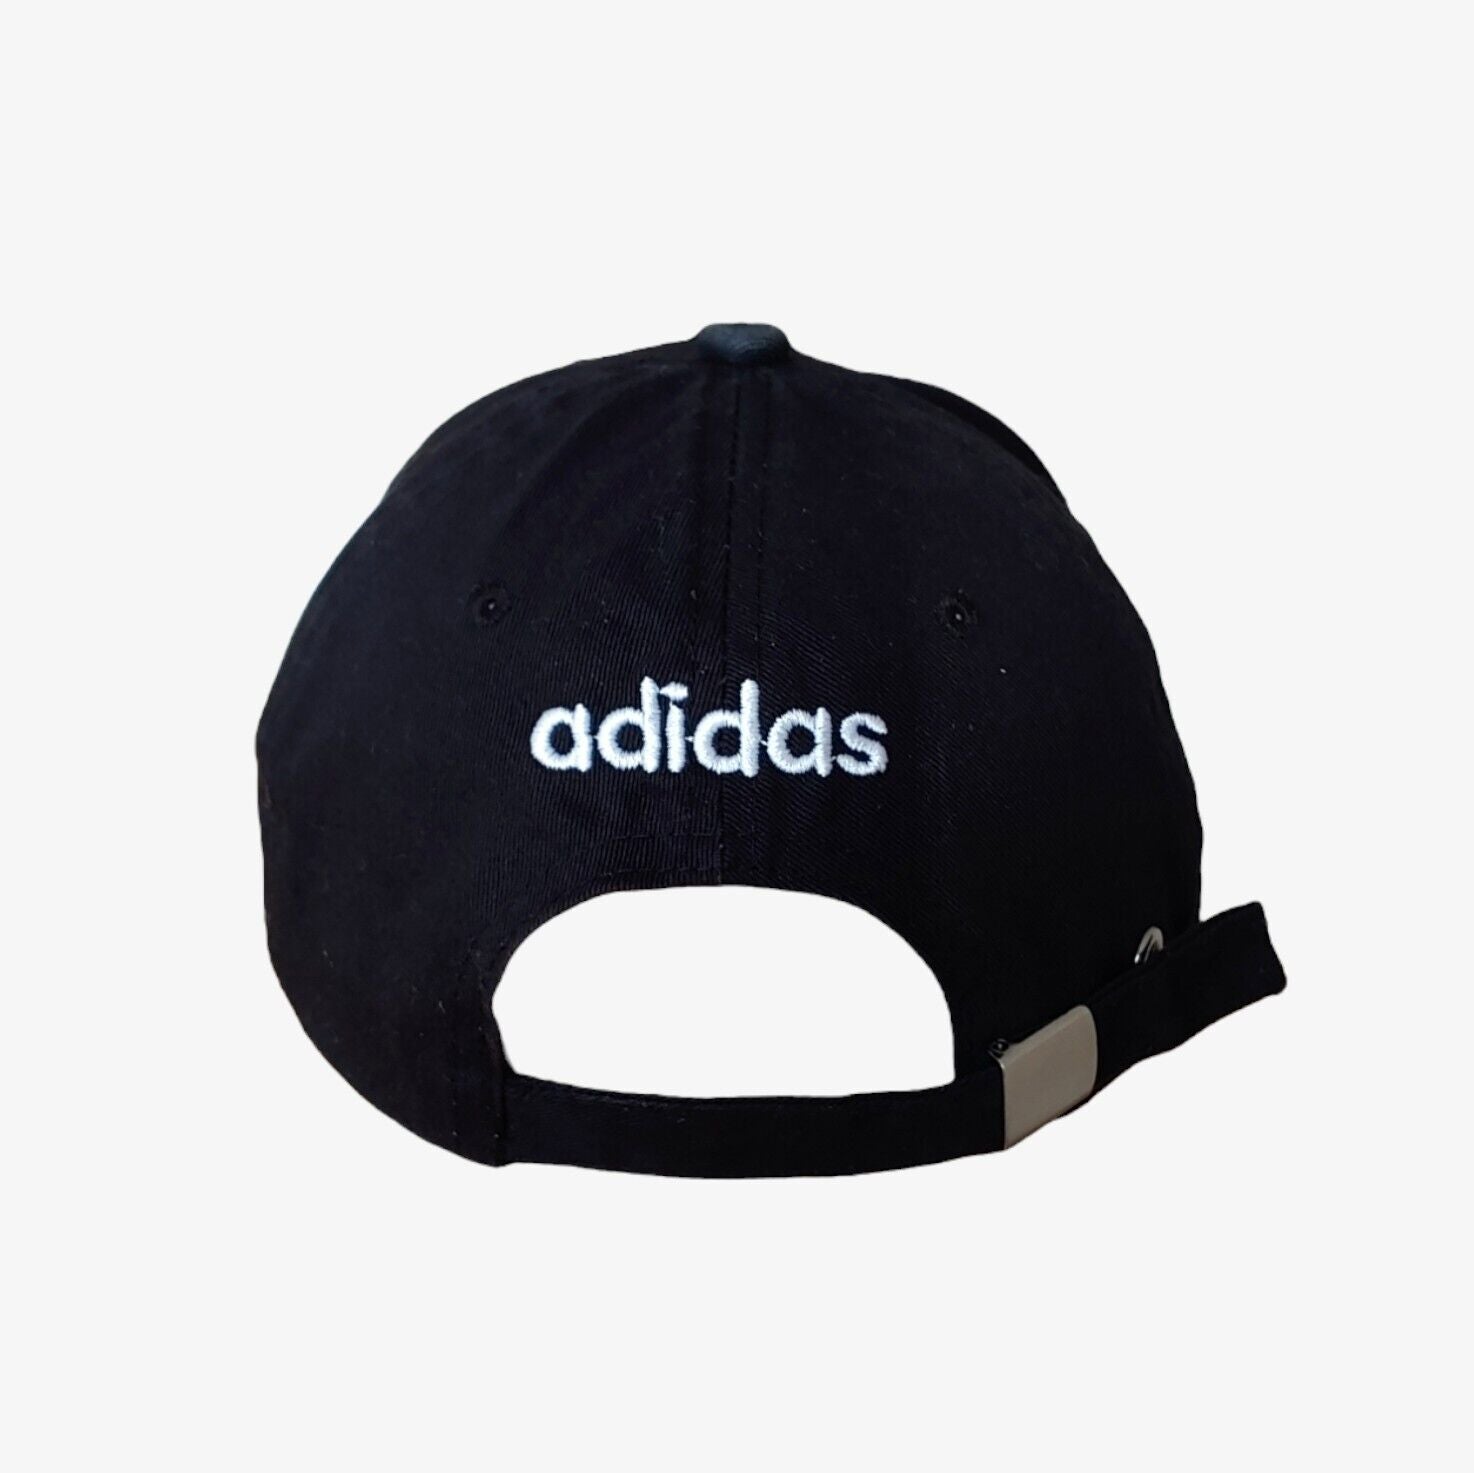 Vintage 90s Adidas Black Spell Out Embroidered Cap Back - Casspios Dream